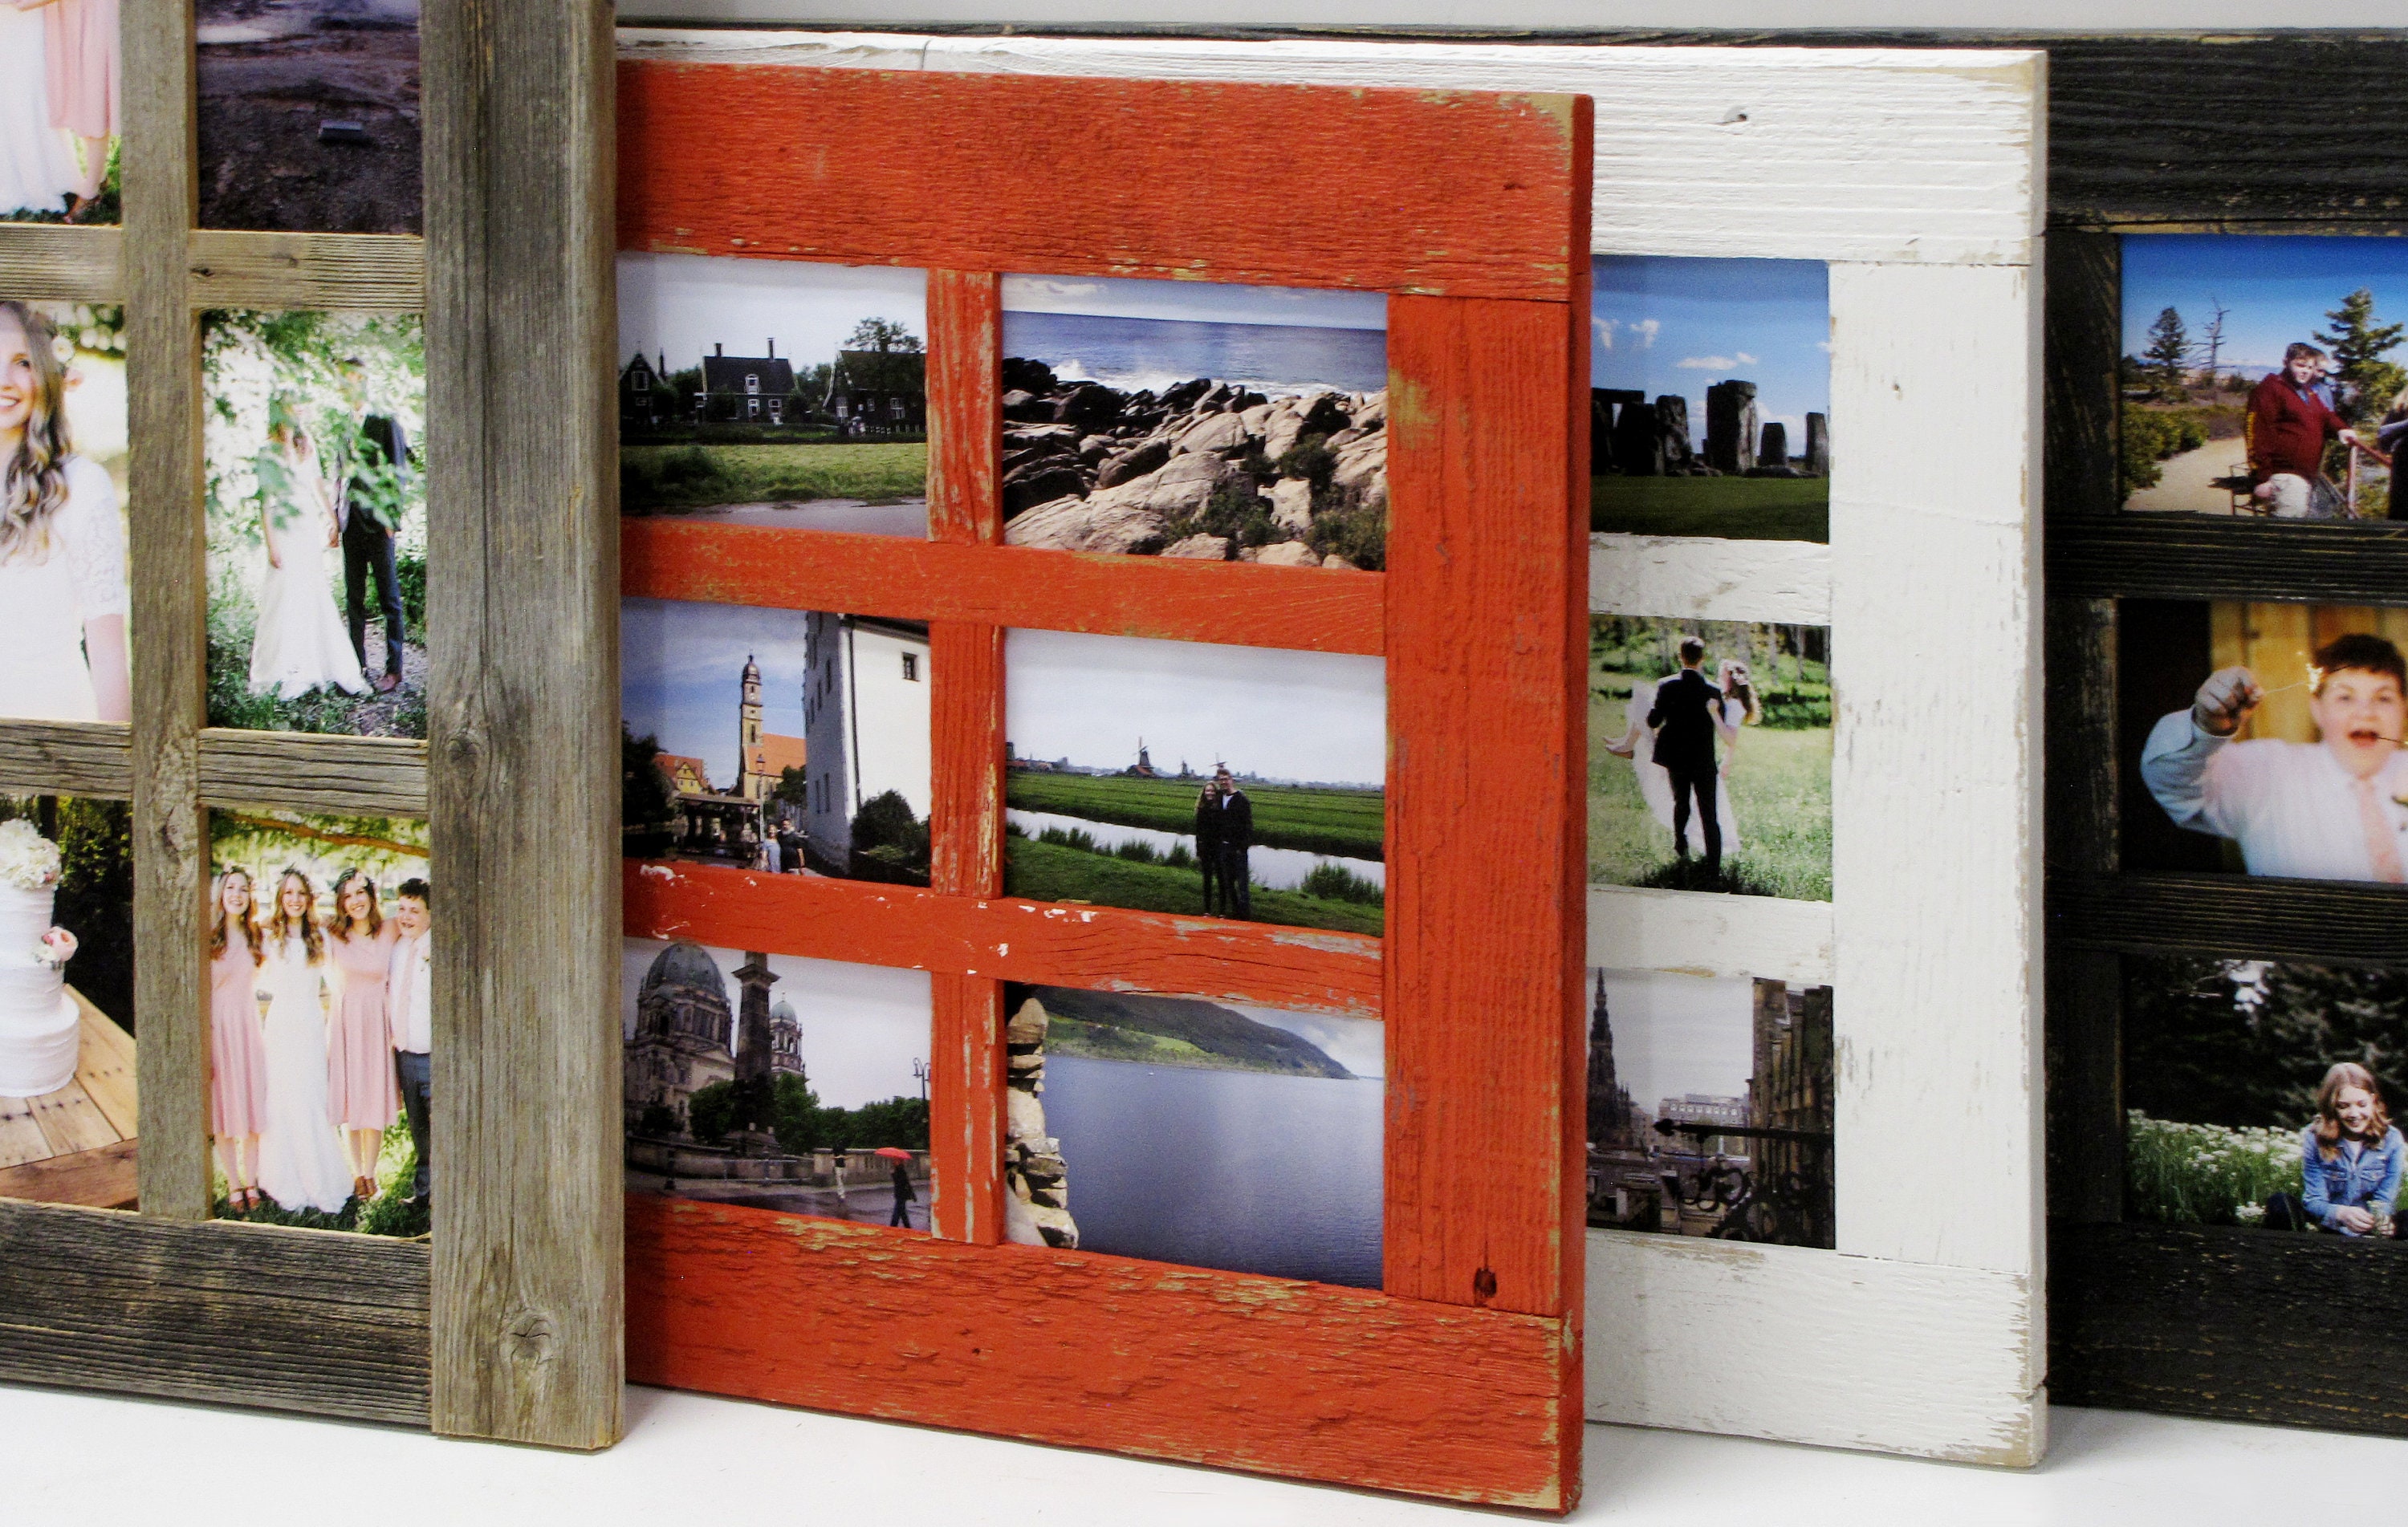 Picture frame collage, 7 opening 4x6, multi photo frame, shabby chic f –  the photo frame store